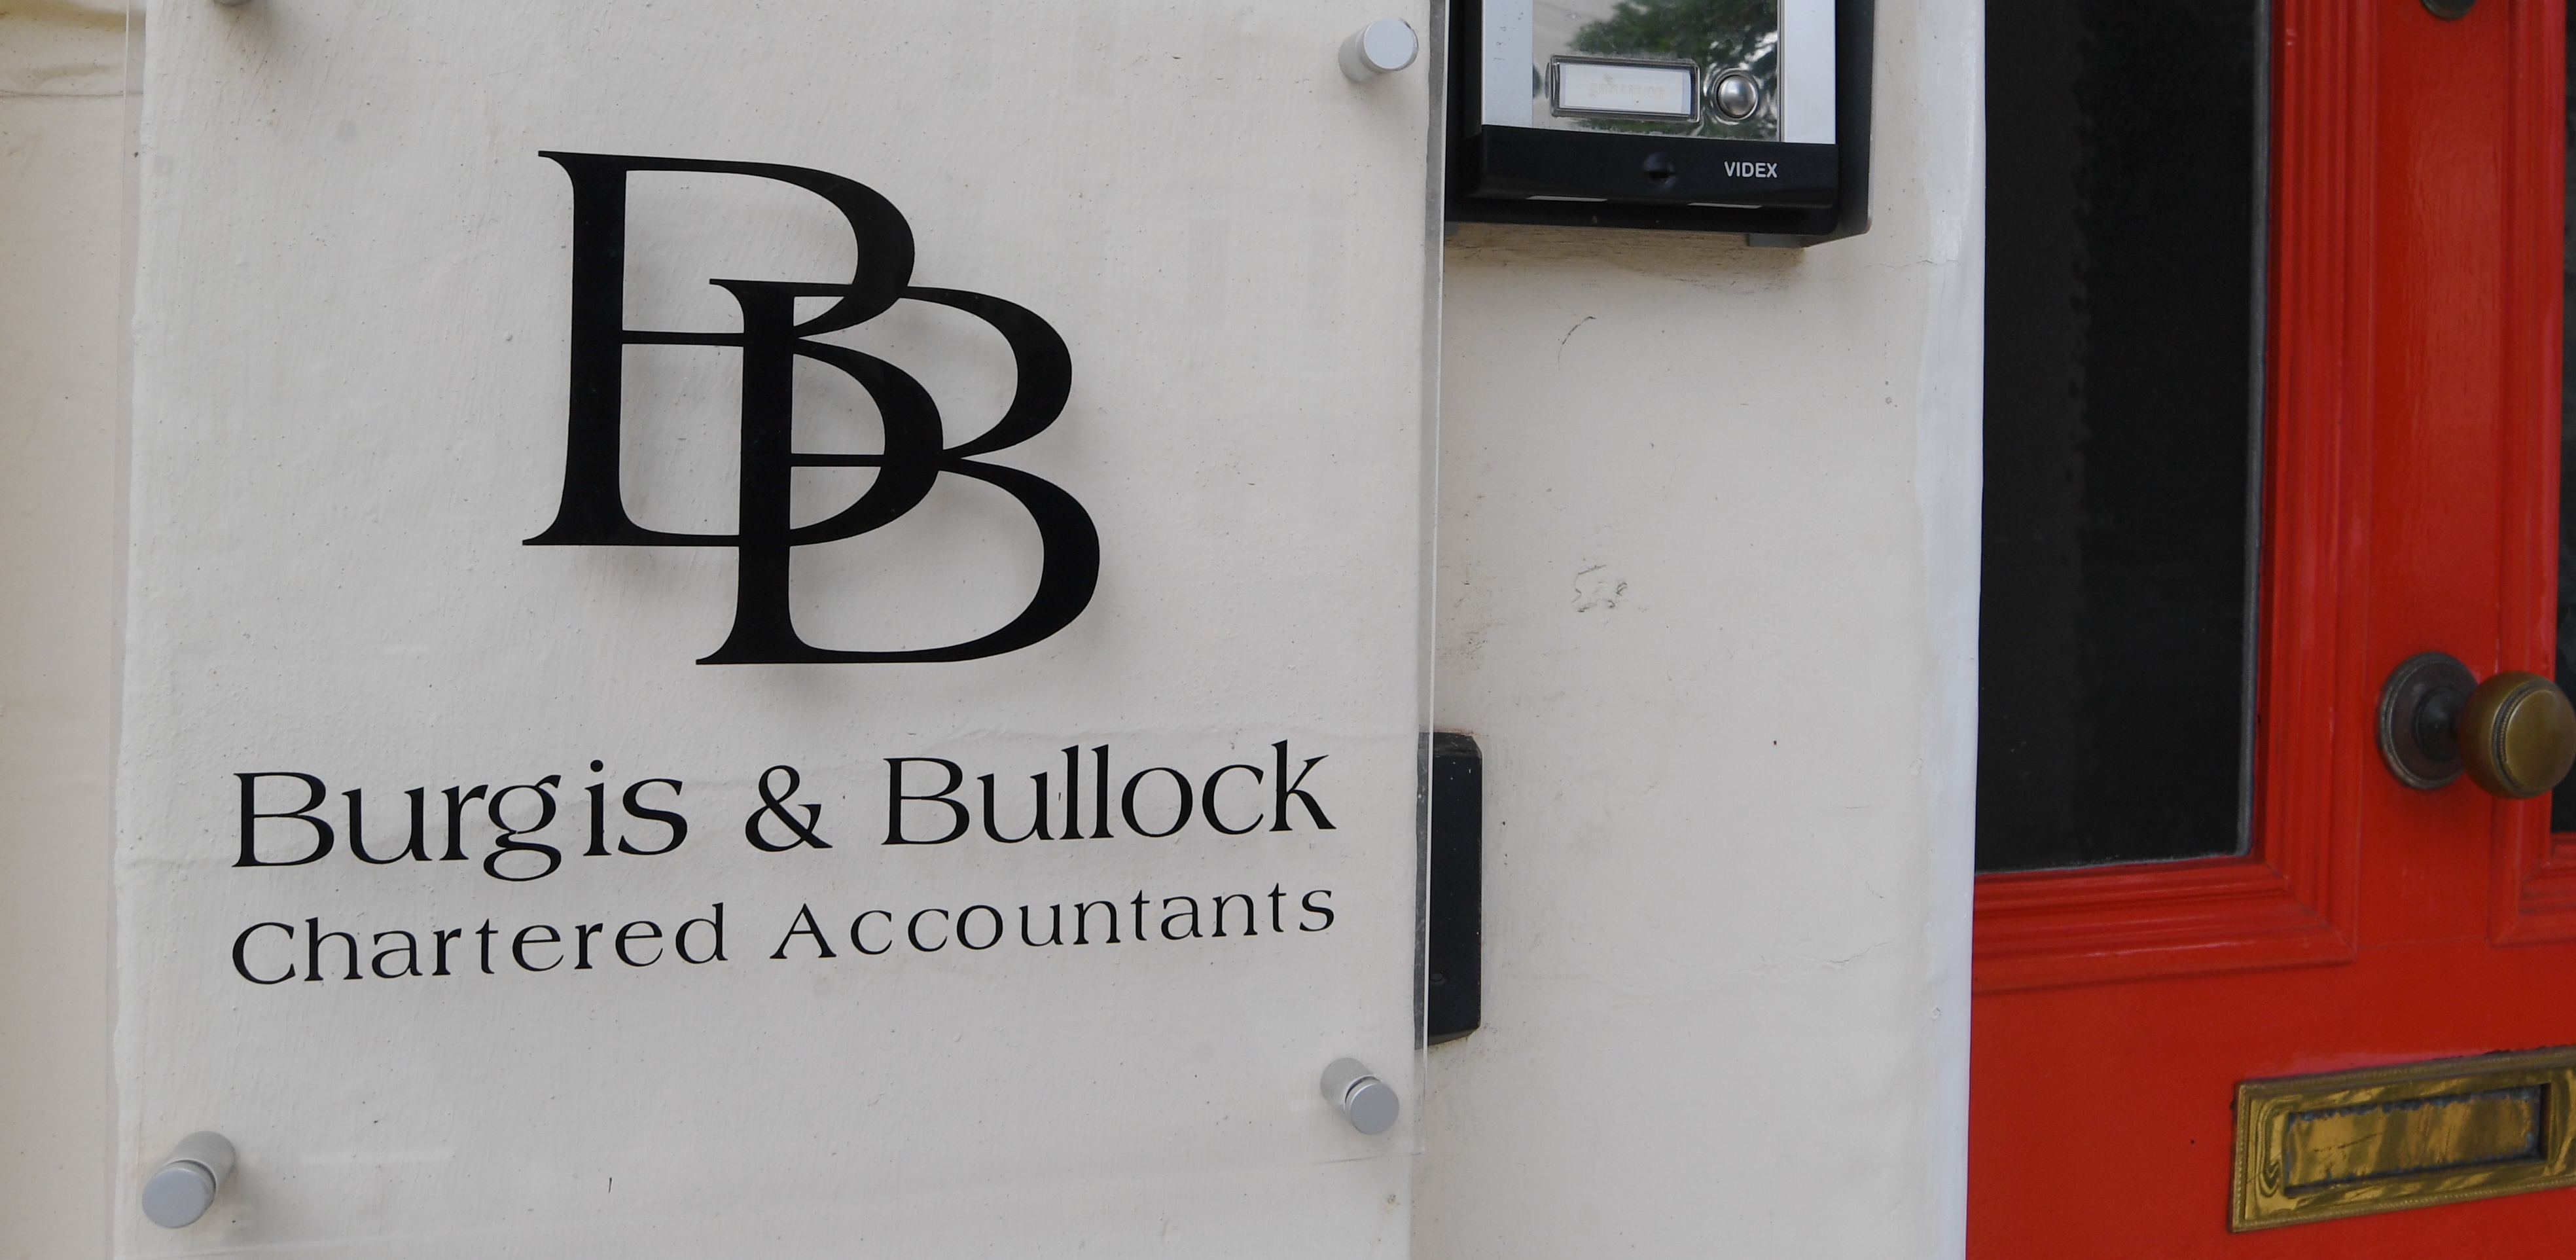 Warwickshire accountancy firm reaffirms training and development commitment with new hires